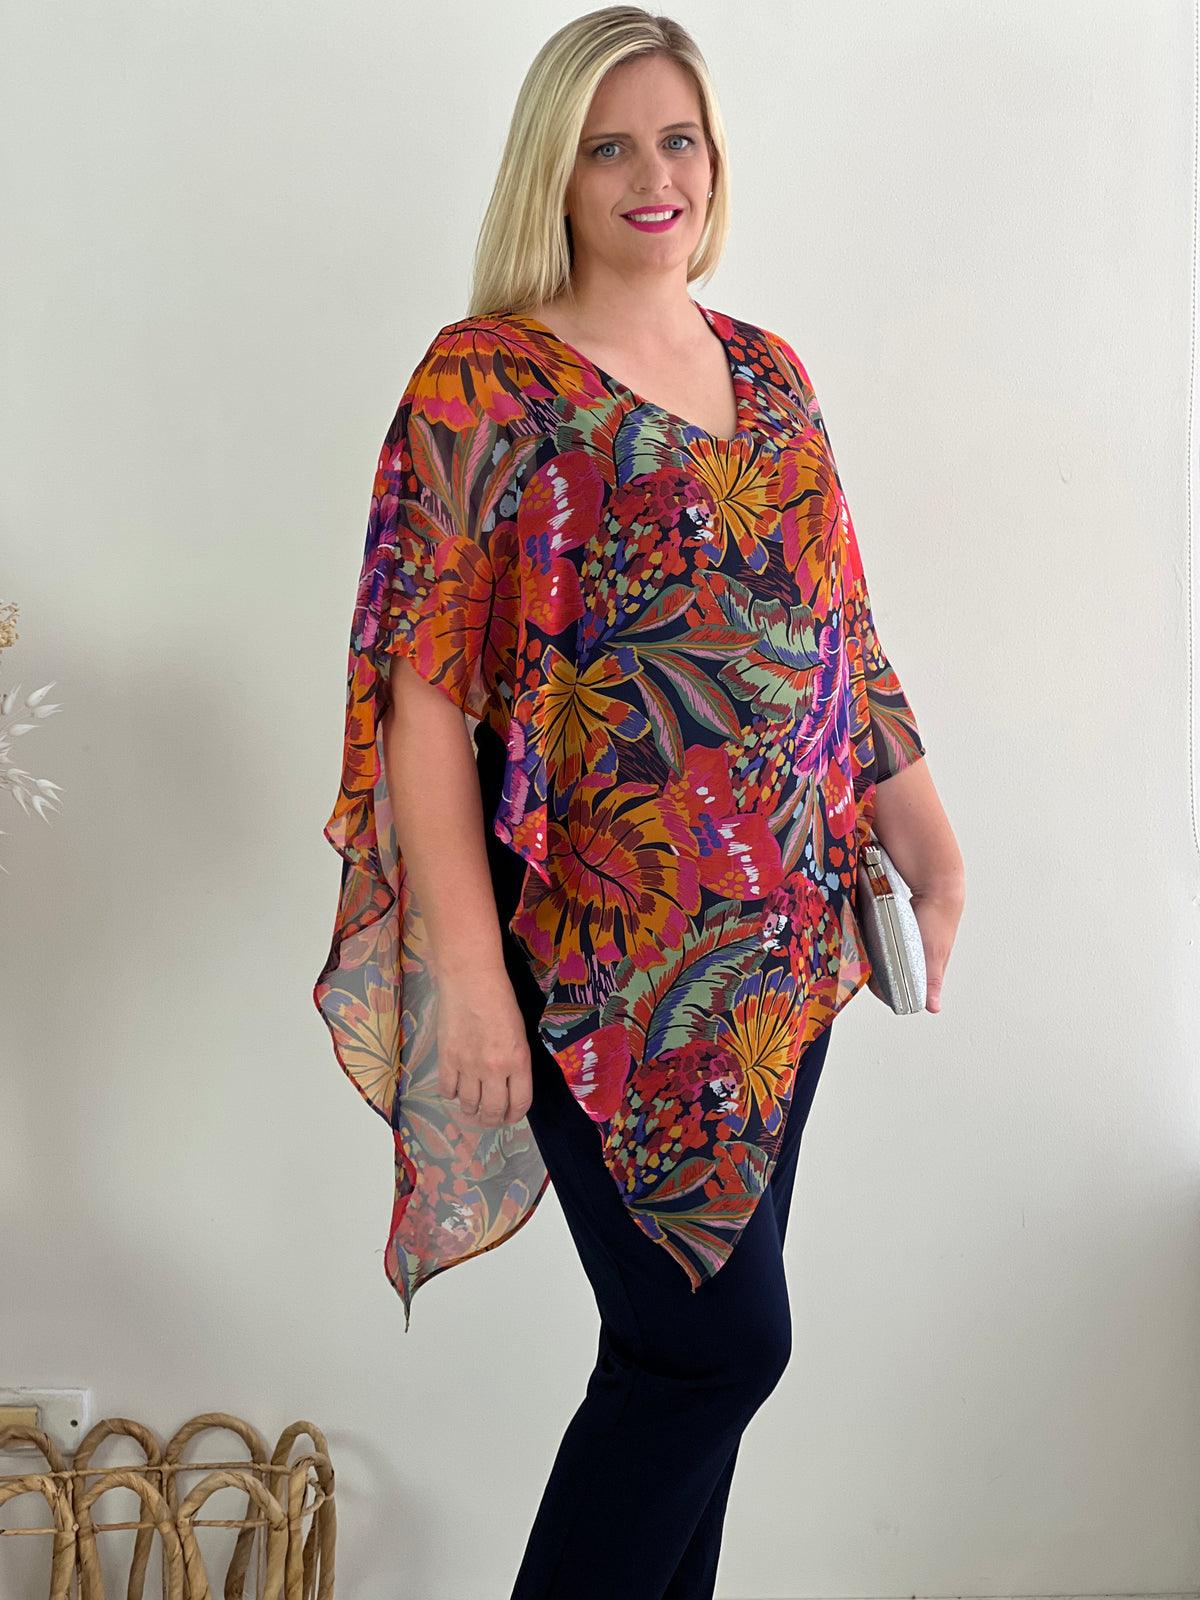 Quill Fire Floral Evening Top